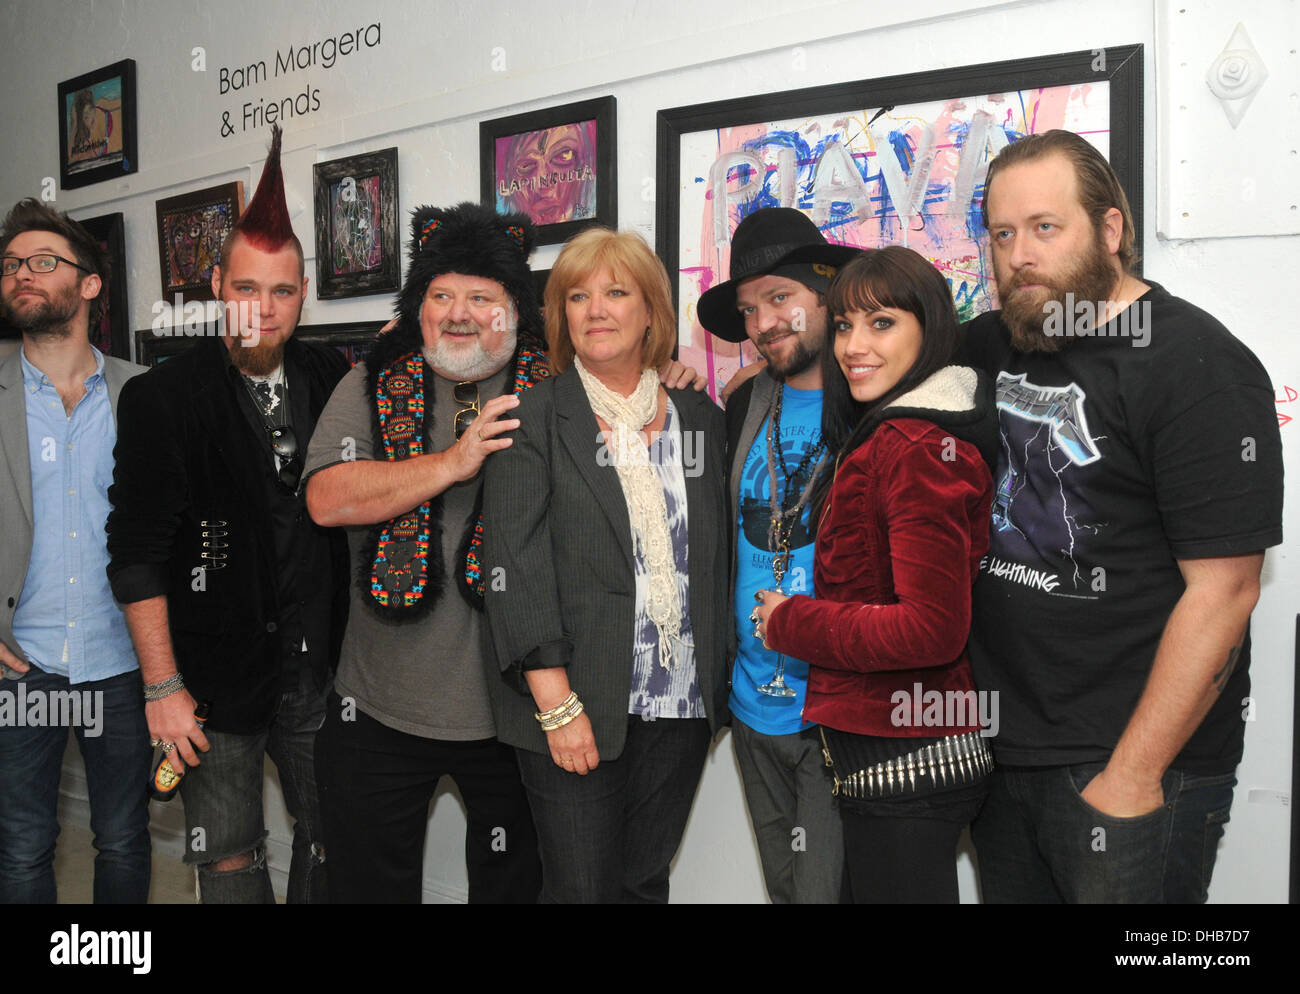 Ryan Gee Red Hawk Phil Margera April Margera Bam Margera Nikki B and Justin Muir Bam Margera & Friends art exhibition opening Stock Photo